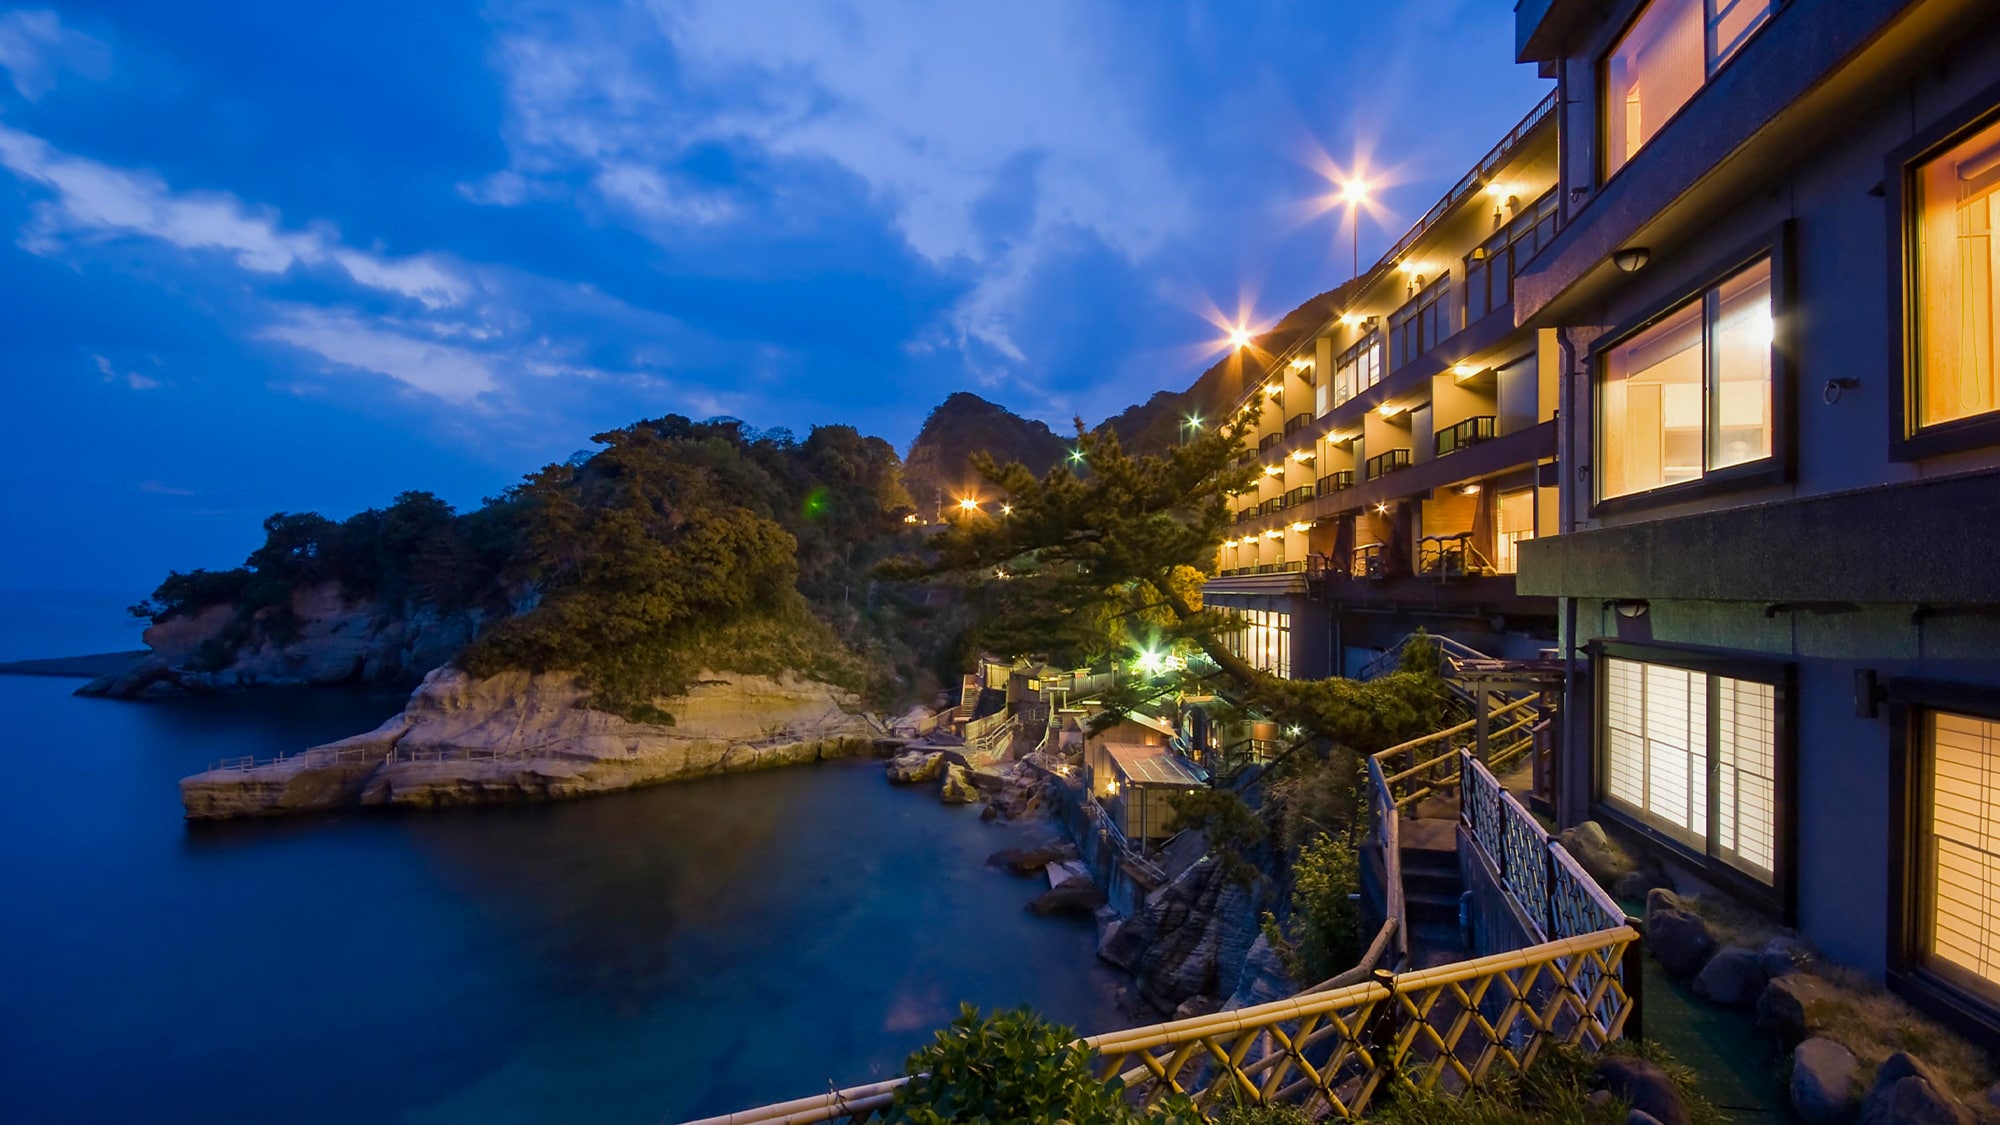 ■ A seaside hidden hot spring inn nestled on the cliffs of a cove. It is the closest inn to the sea in Nishiizu.